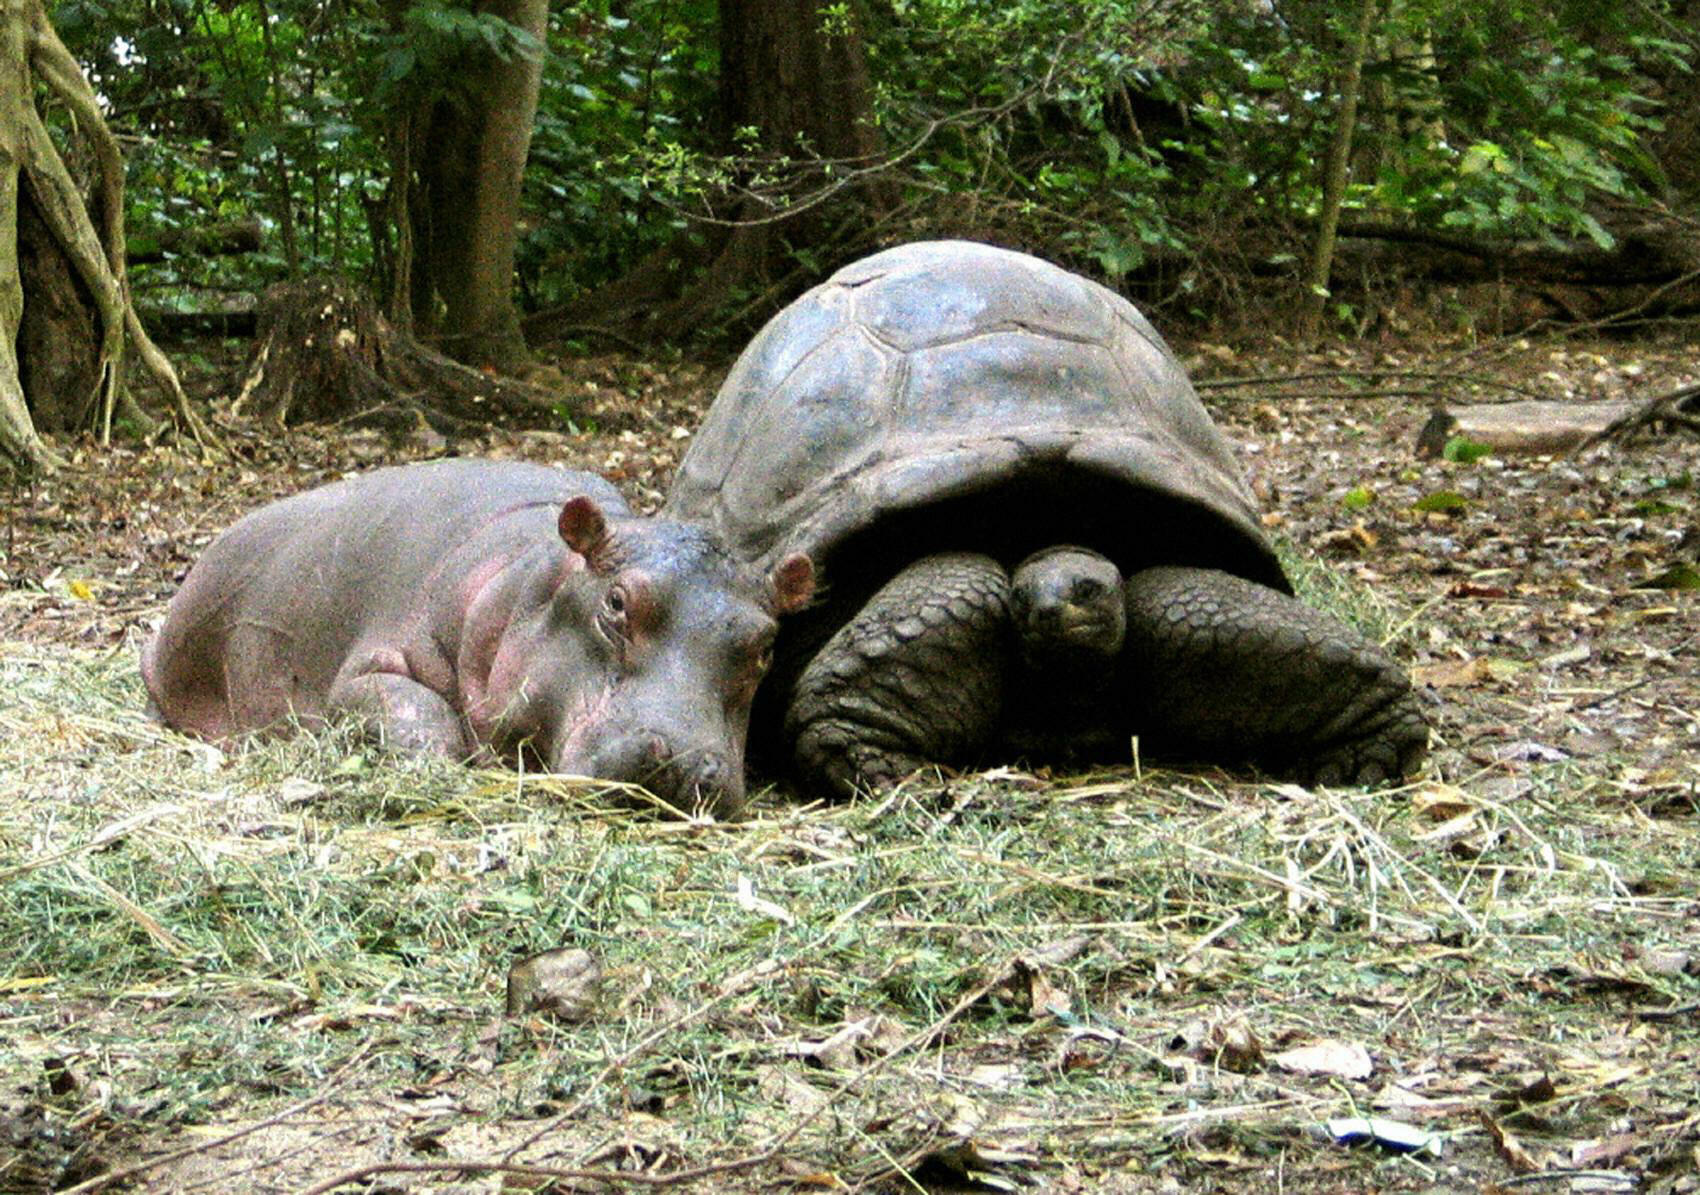 MOMBASA, KENYA:  A baby hippopotamus that survived the tsumani waves on the Kenyan coast snuggles up to its new best friend, a giant century old tortoise in an animal facility in Mombasa, 06 January 2005. The hippopotamus, nicknamed Owen and weighing abou